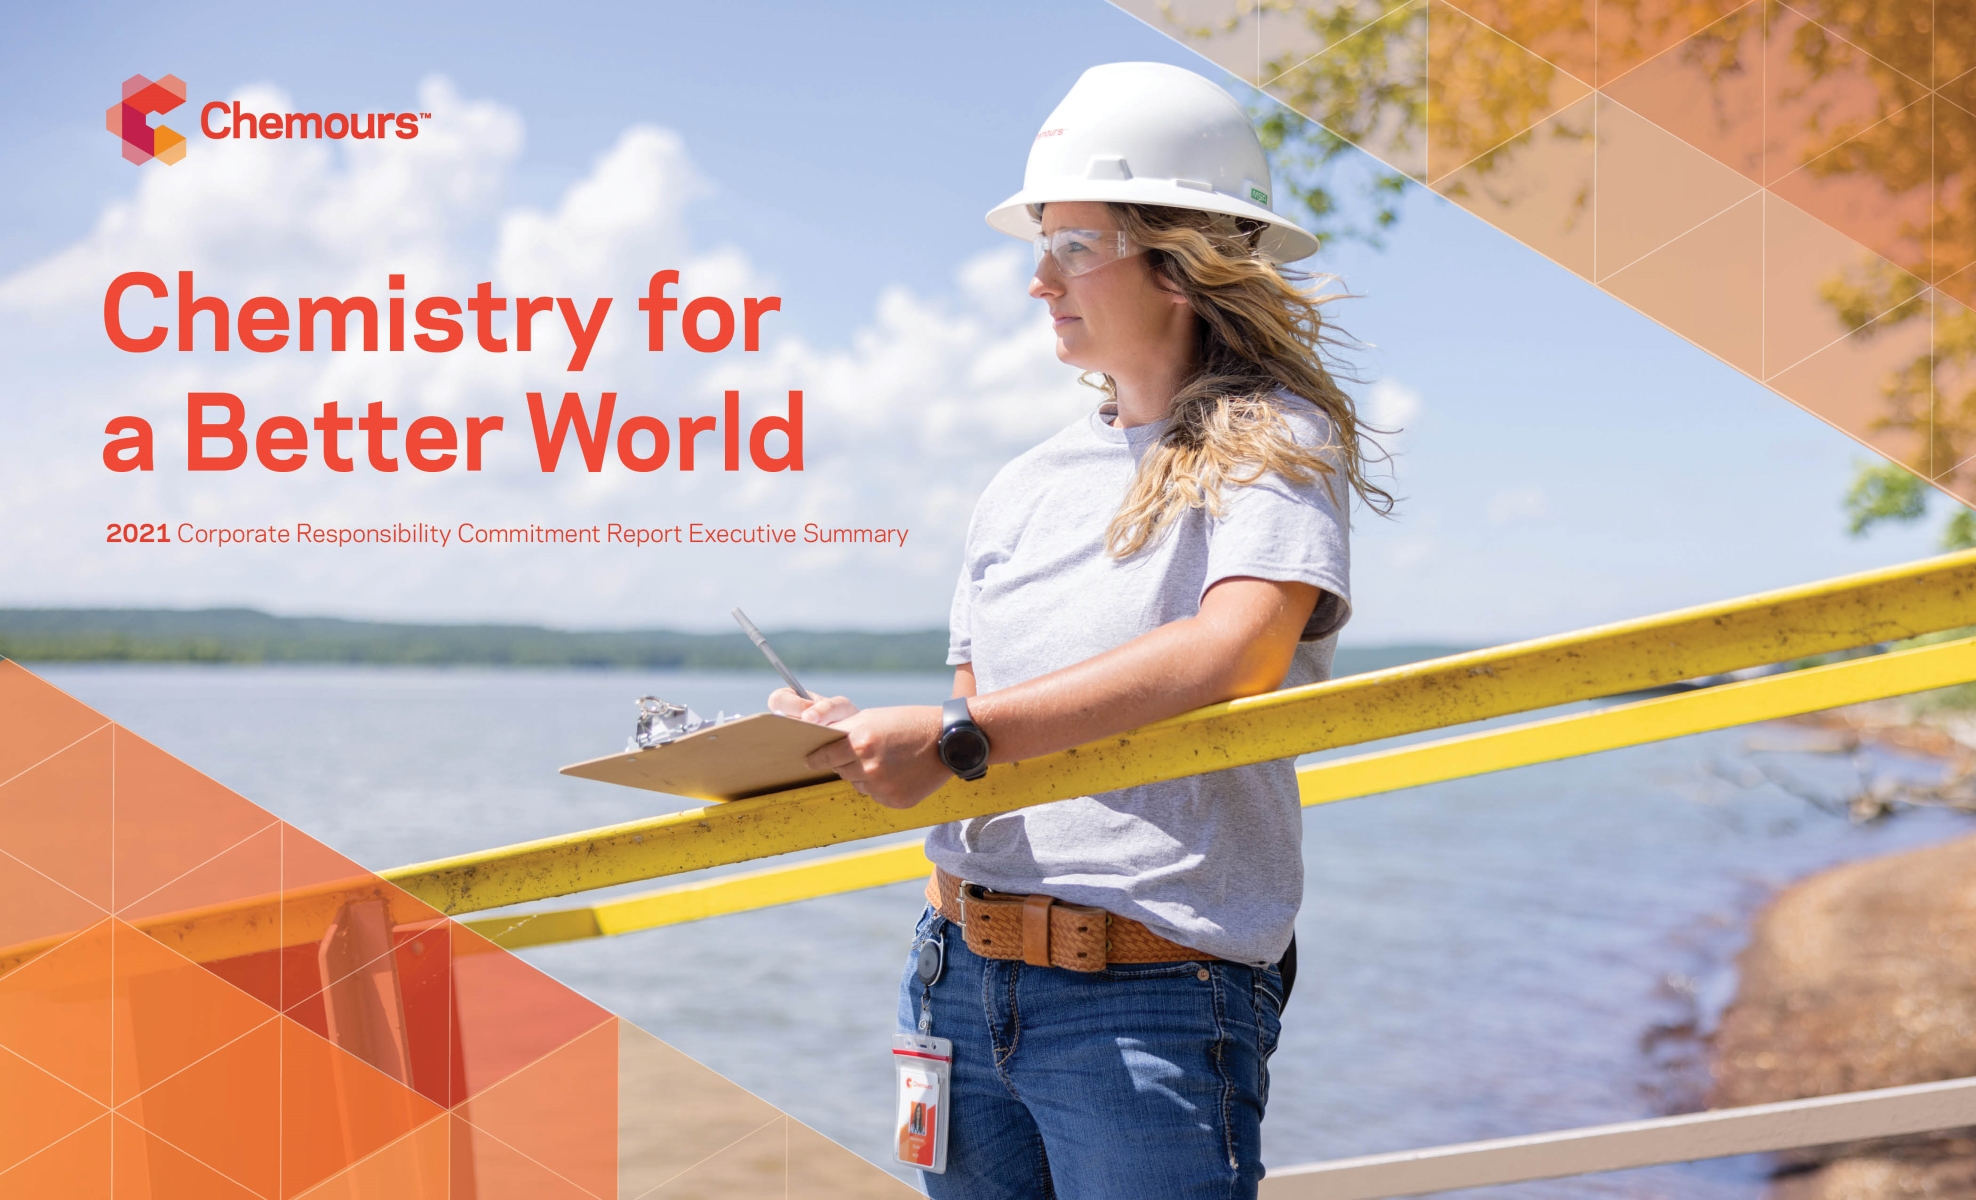 "Chemistry for a Better World" report cover